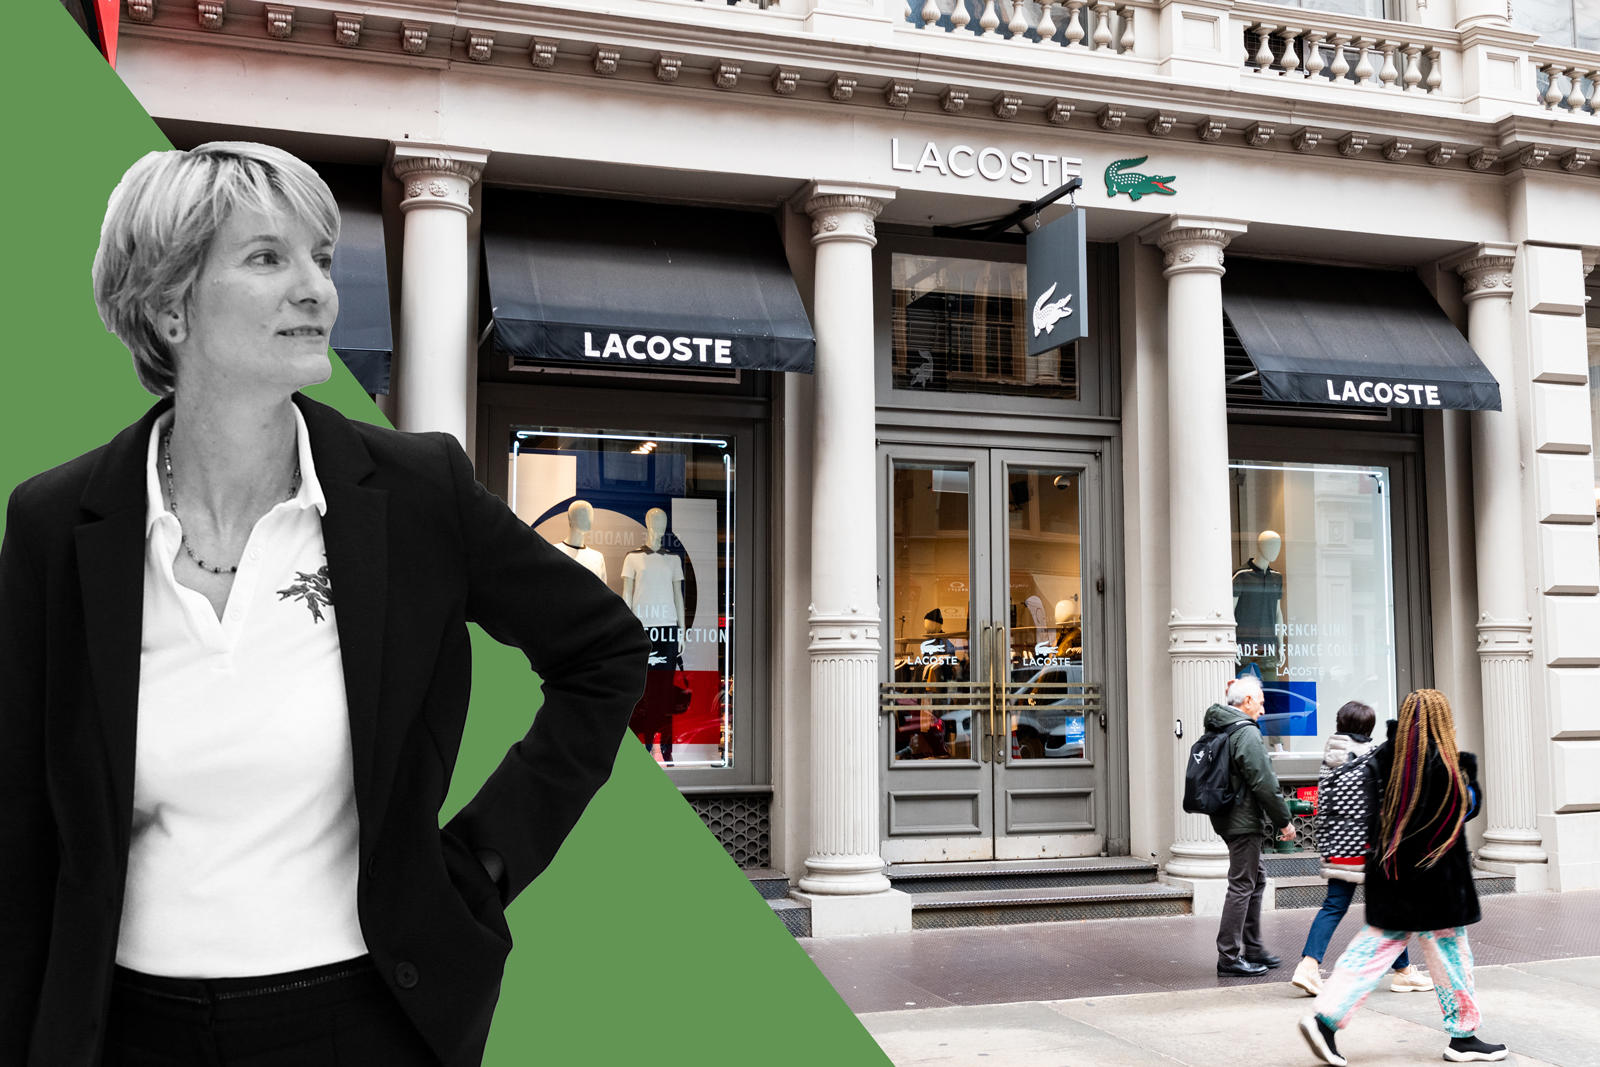 Lacoste USA’s chief financial officer Karine Sansot-Vincent and a Lacoste store in Soho, New York (Jimi Celeste/Patrick McMullan via Getty Images and Michael Brochstein/SOPA Images/LightRocket via Getty Images)